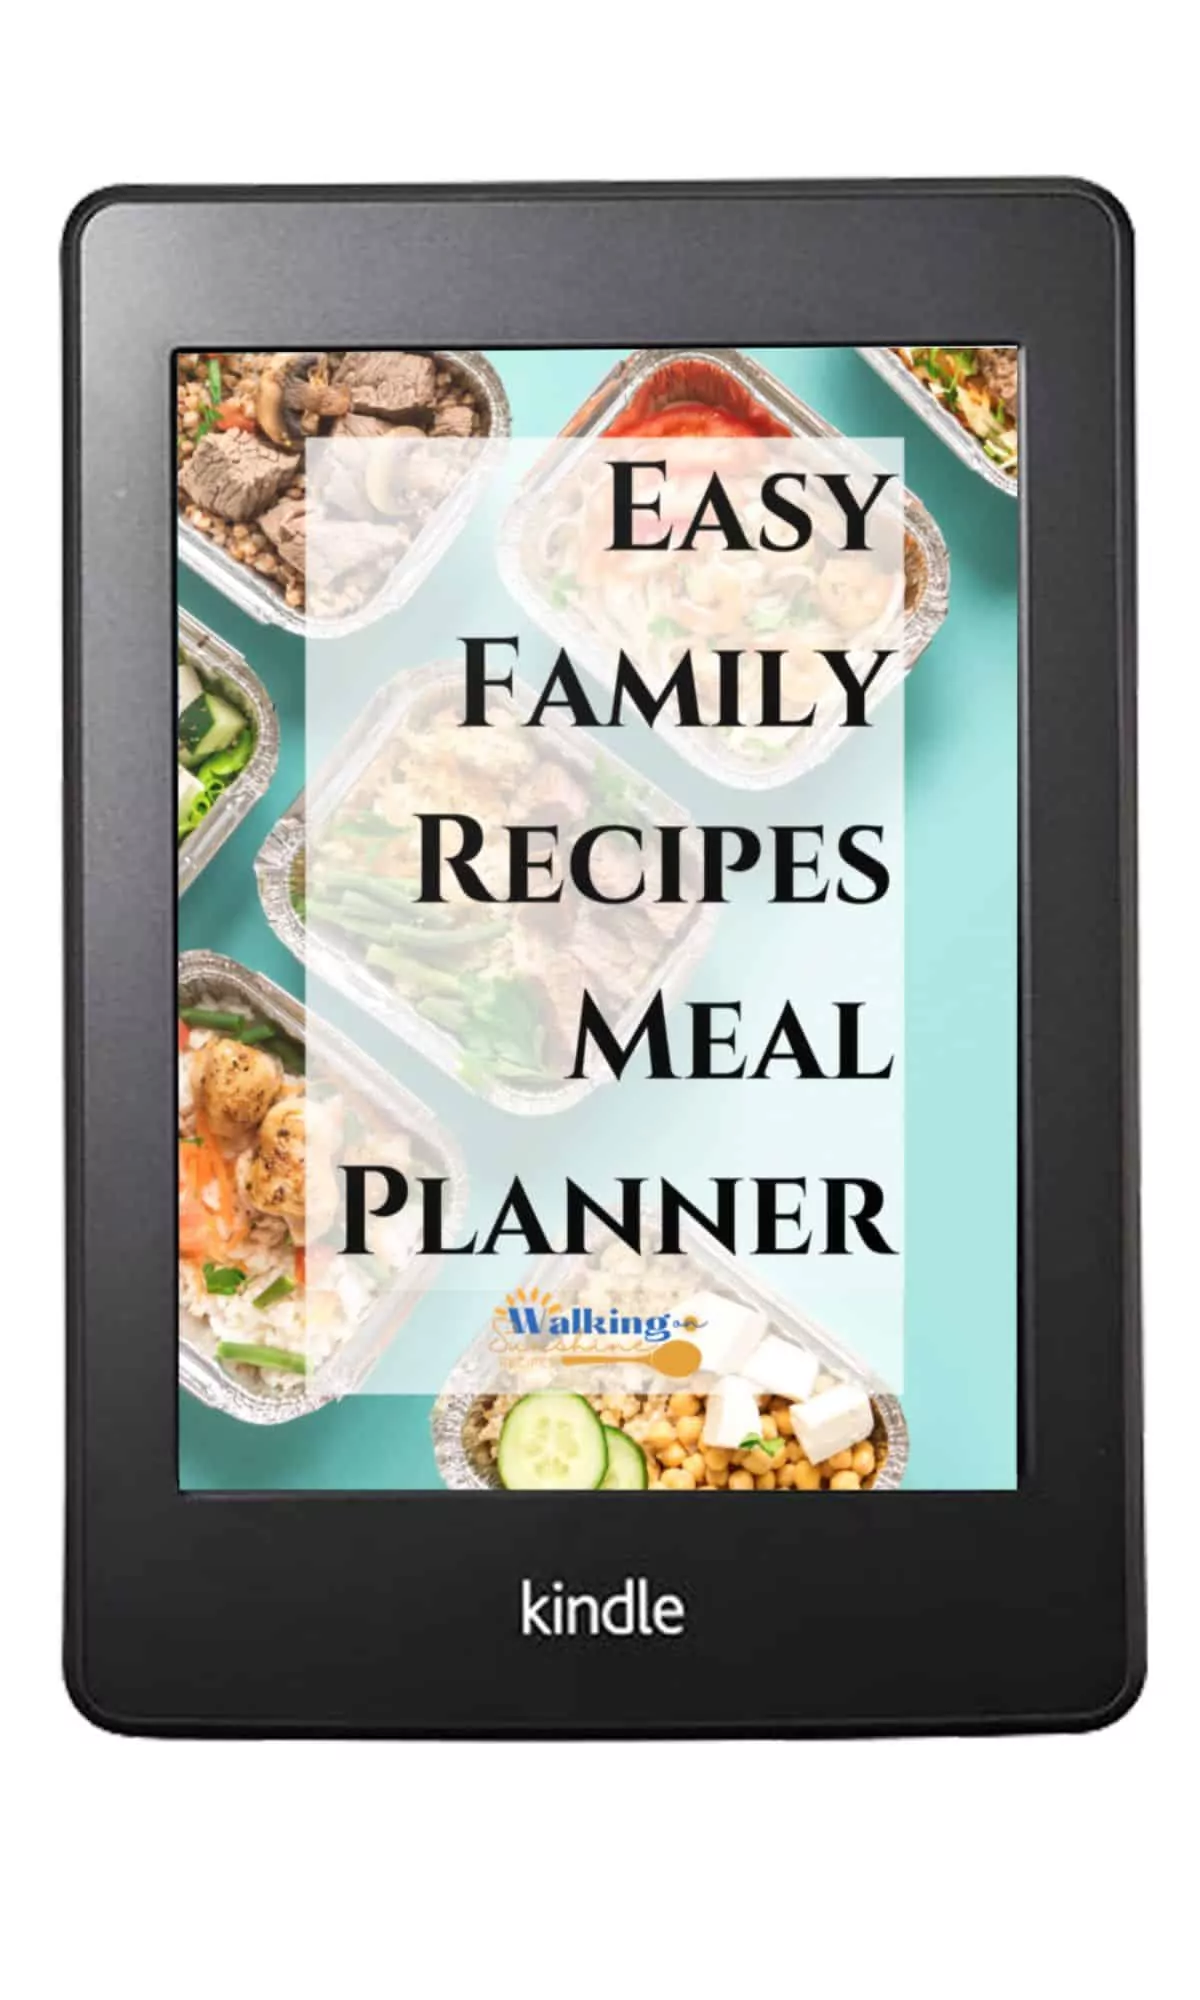 Easy Family Recipes Meal Planner